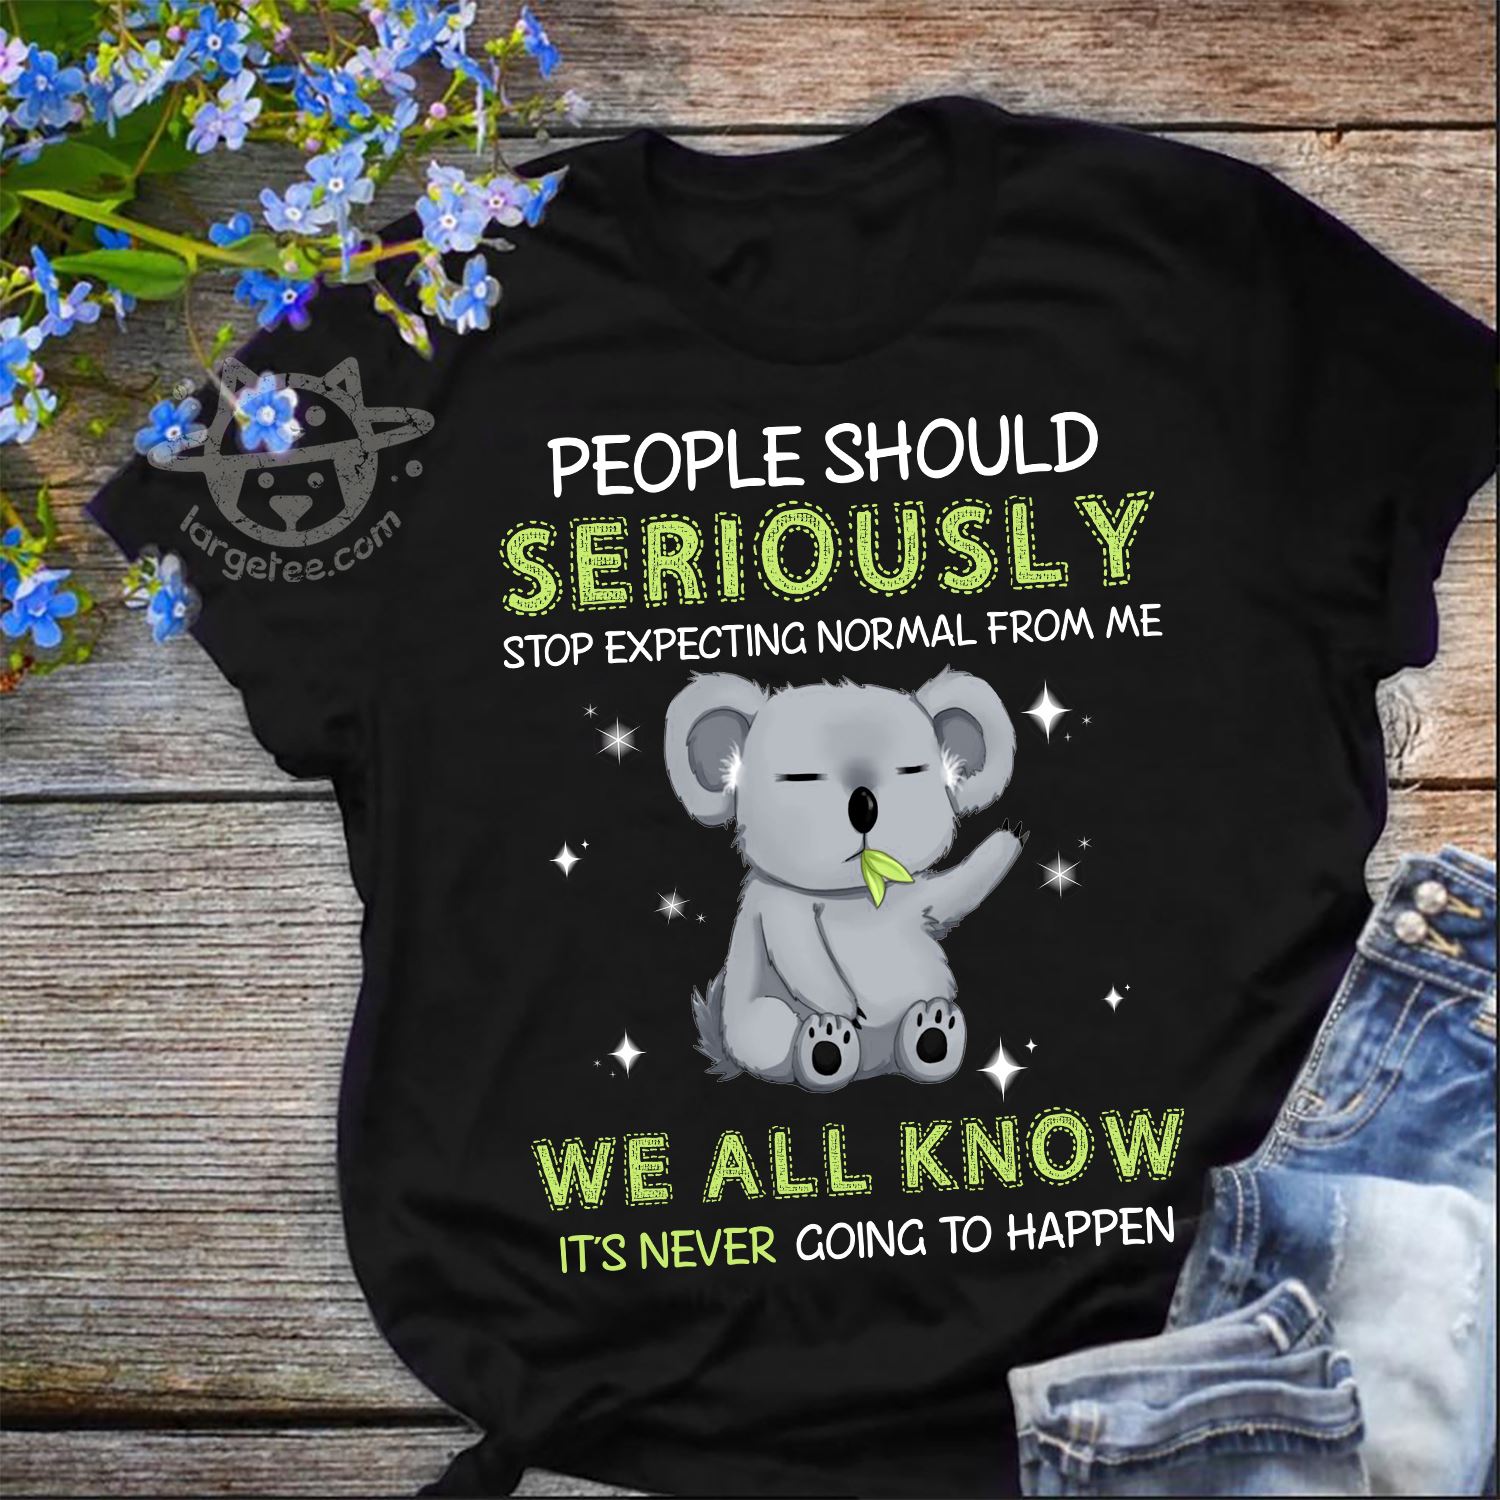 People should seriously stop expecting normal from me - Grumpy koala bear